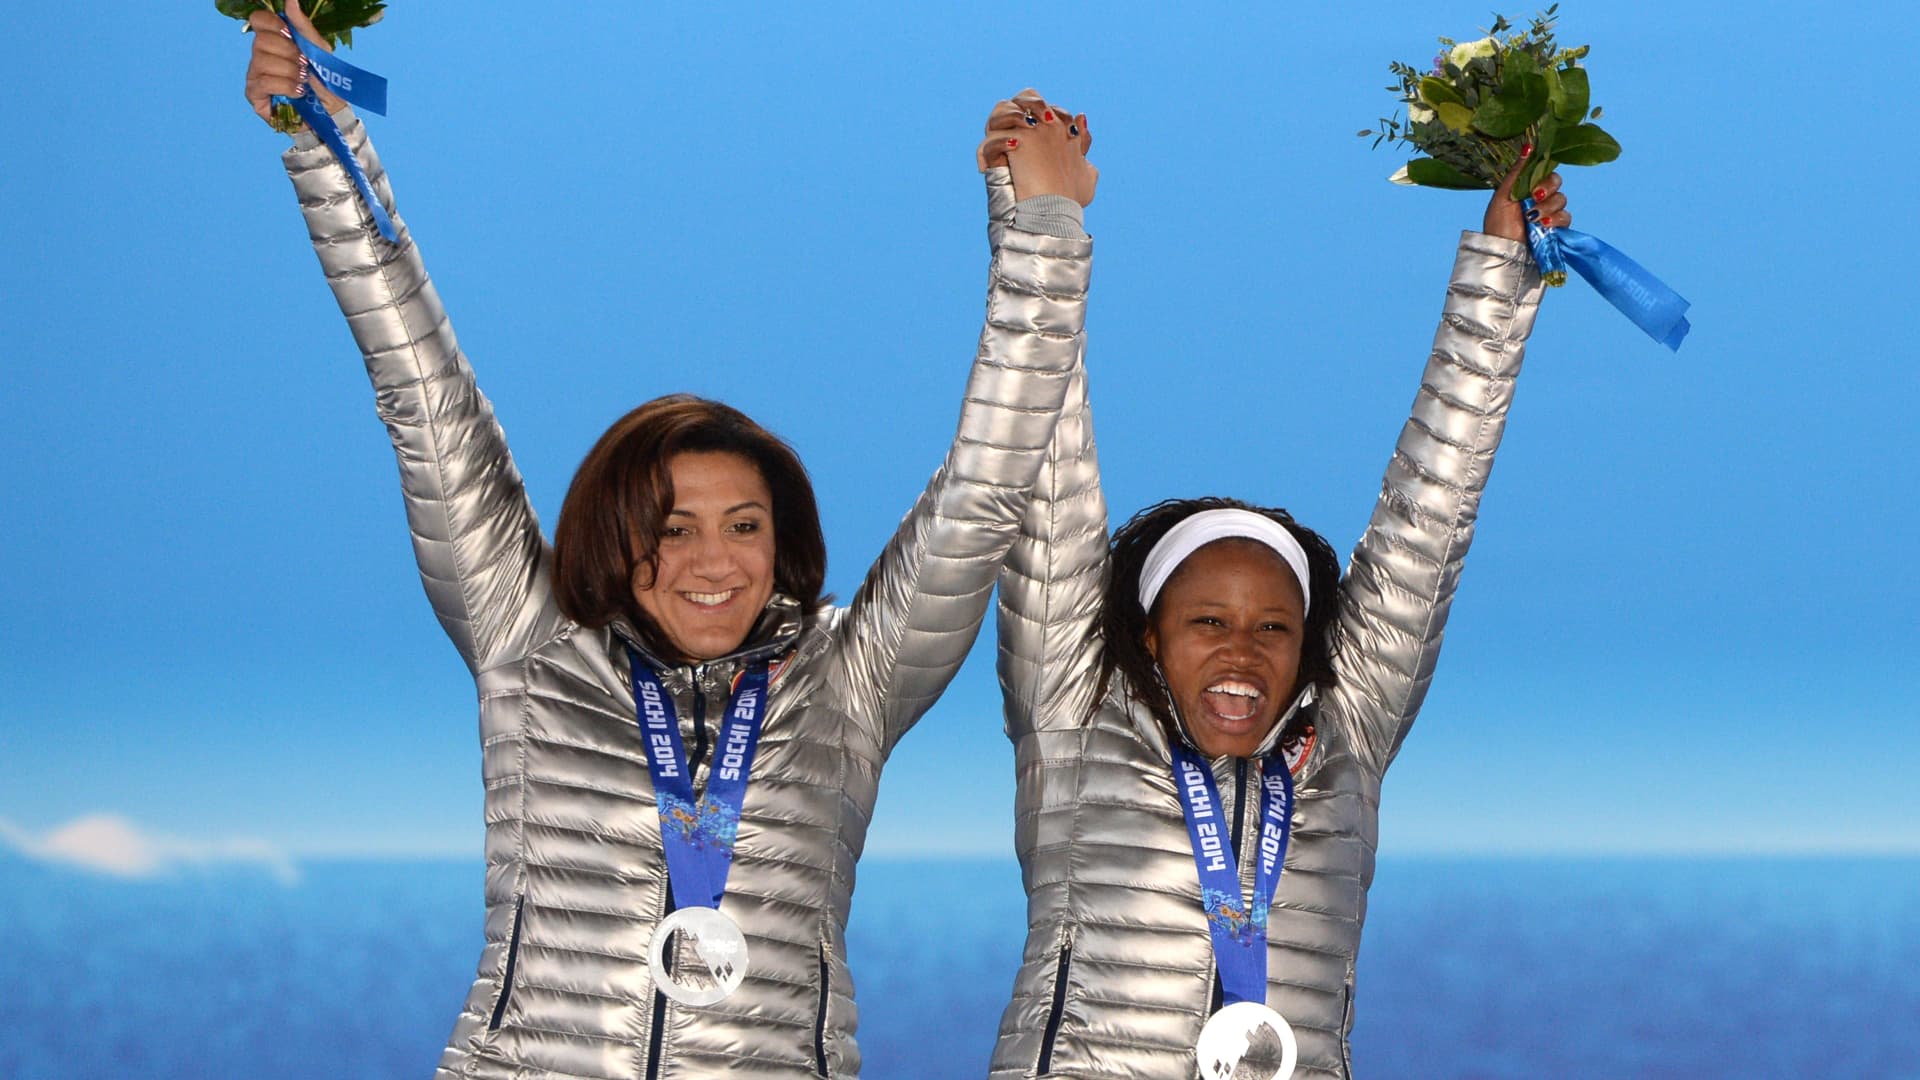 A picture taken with a robotic camera shows US silver medalists pilot Elana Meyers and brakewoman Lauryn Williams celebrating during the Women's Bobsleigh Medal Ceremony at the Sochi medals plaza during the Sochi Winter Olympics on February 20, 2014.